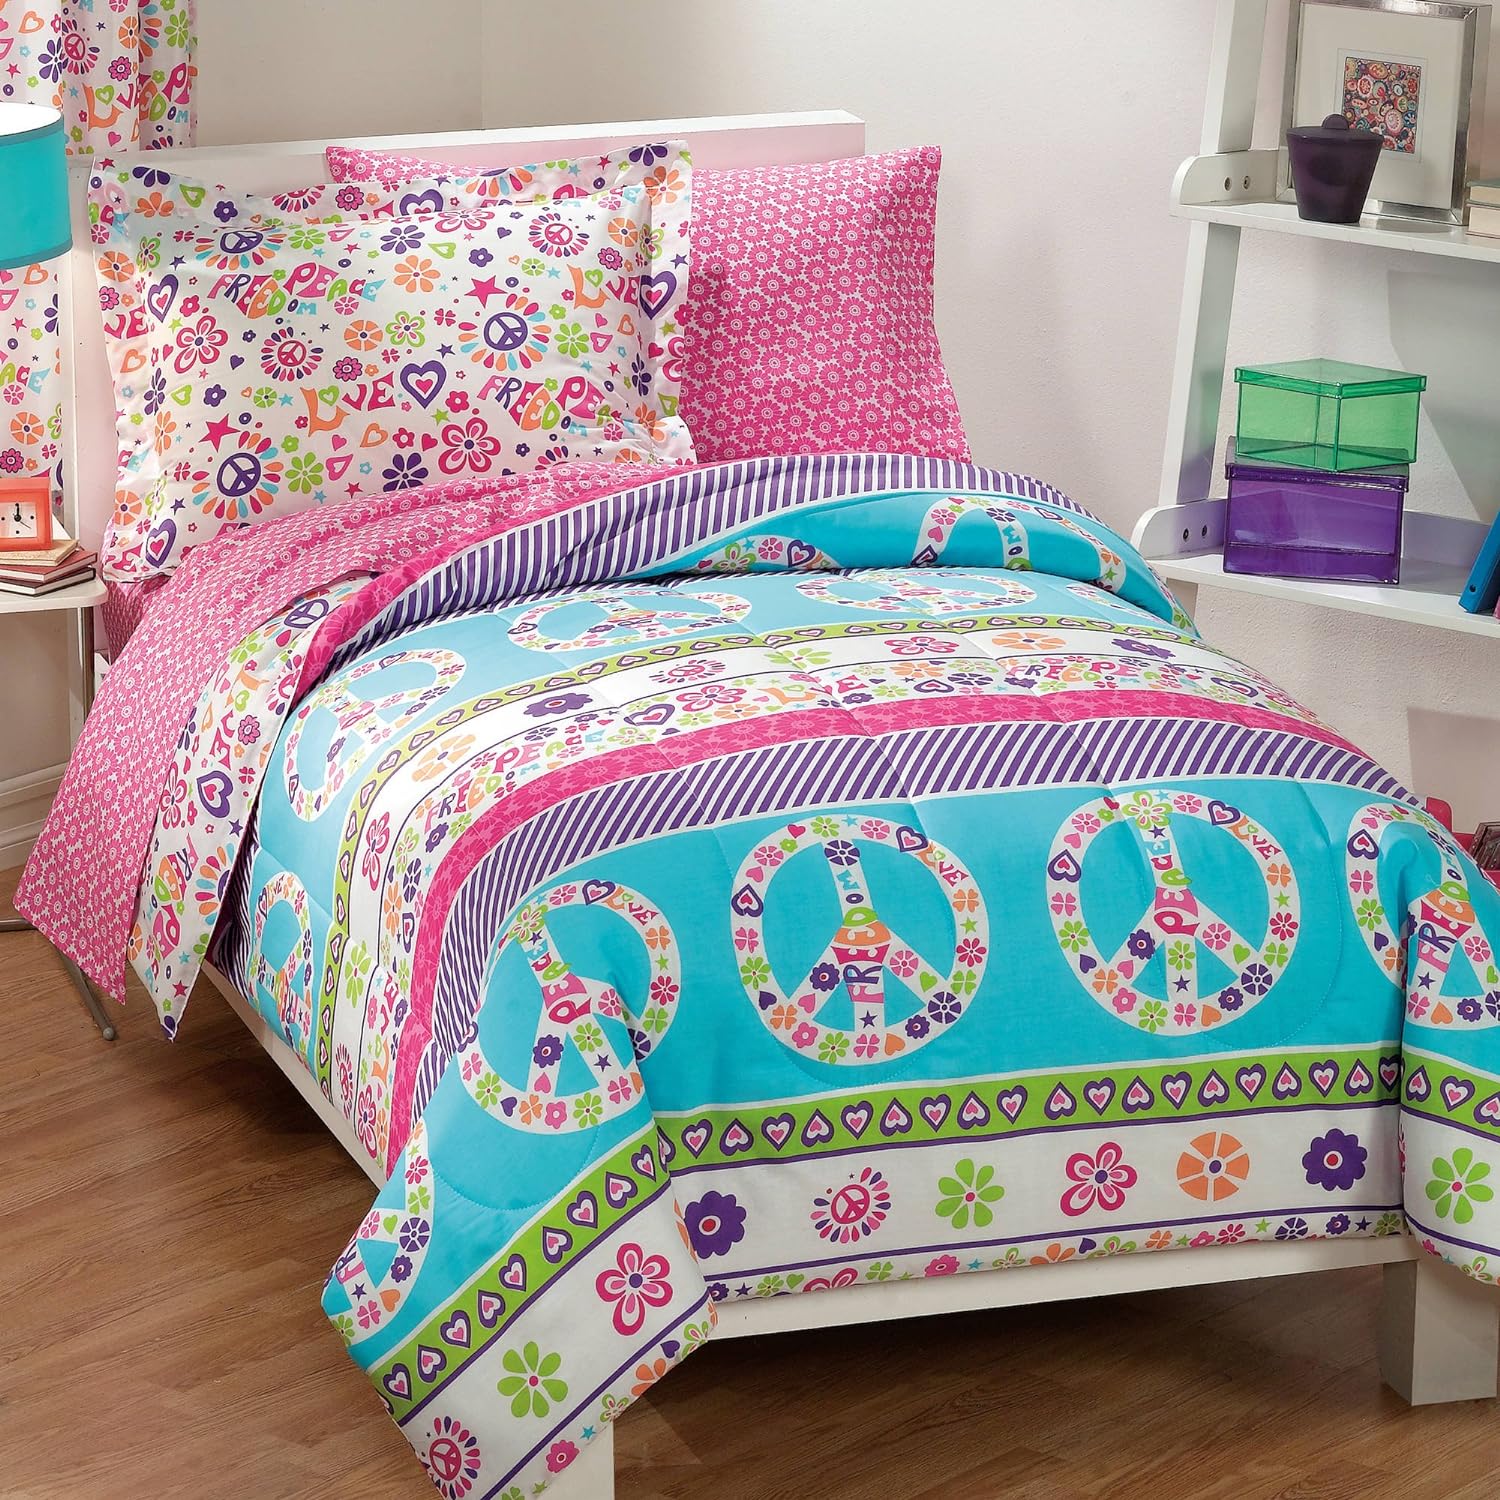 Kids Bedding Pink & Blue Peace Signs & Love Twin Comforter Set (5 Piece Bed In A Bag)